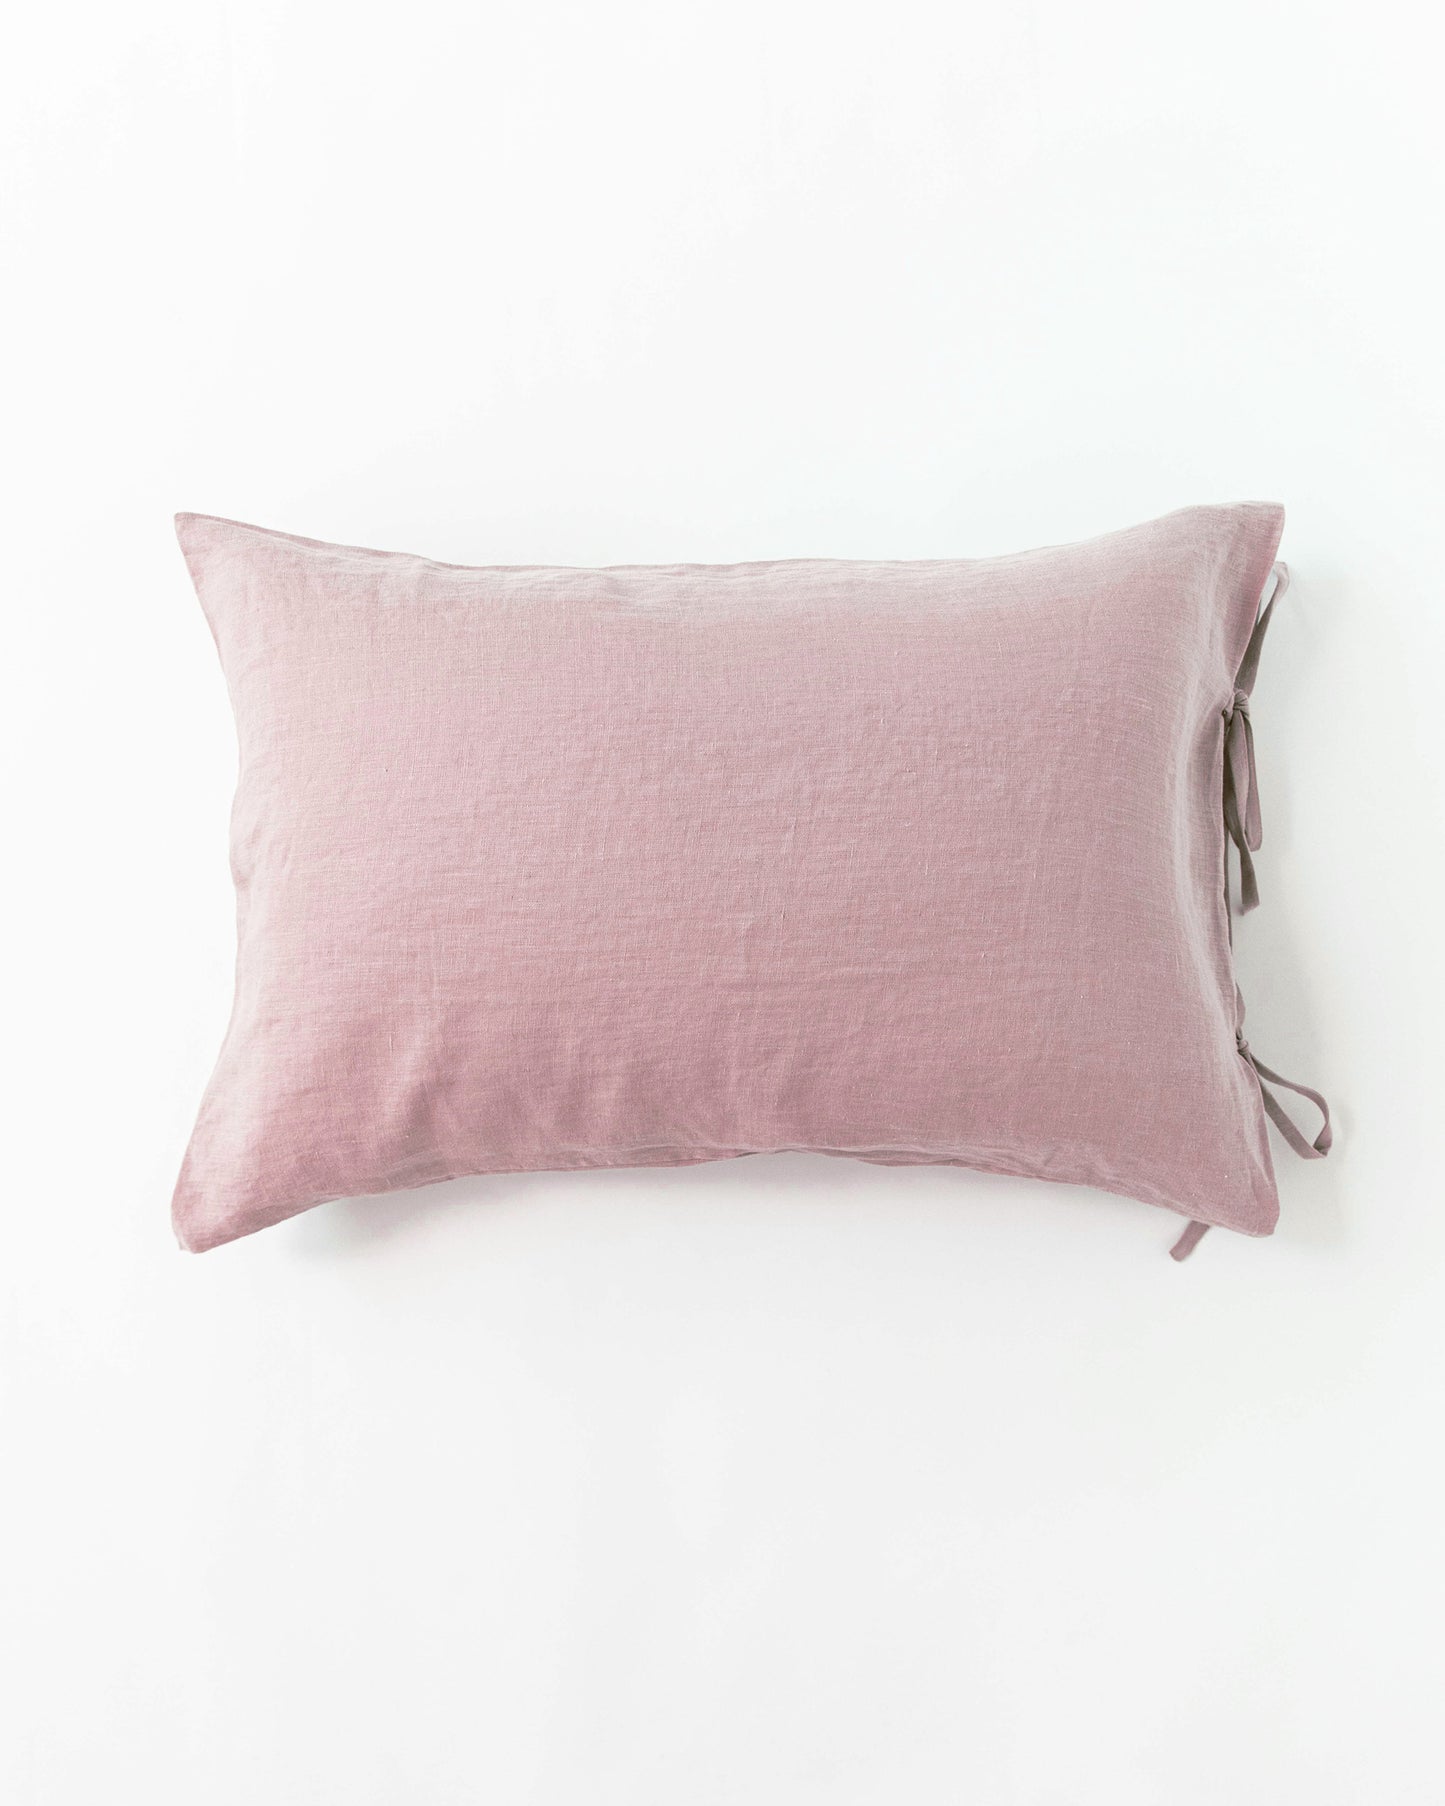 Linen pillowcase with ties in Woodrose - MagicLinen